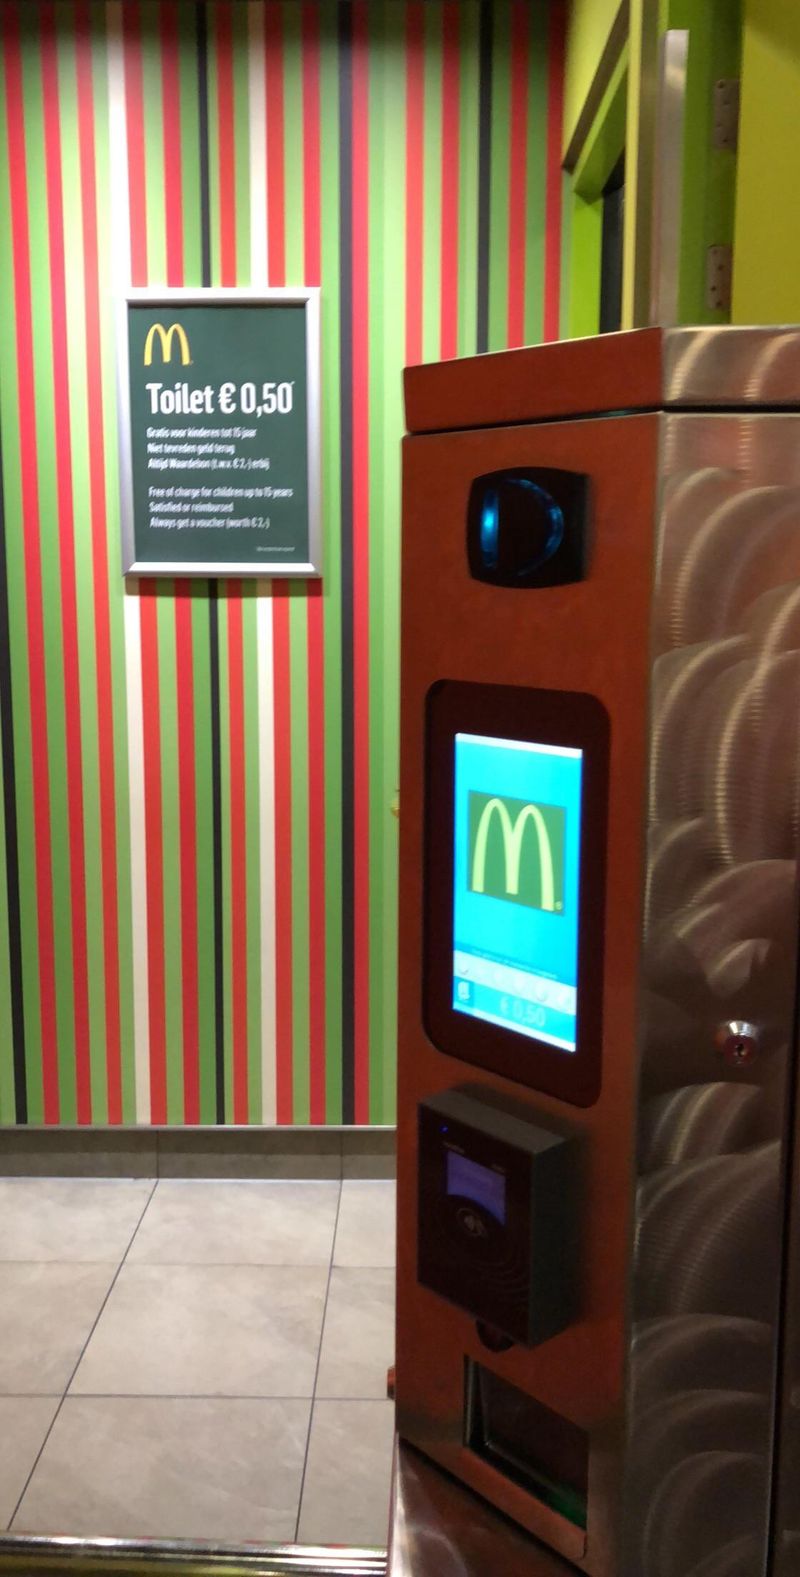 Pay toilet in a McDonalds